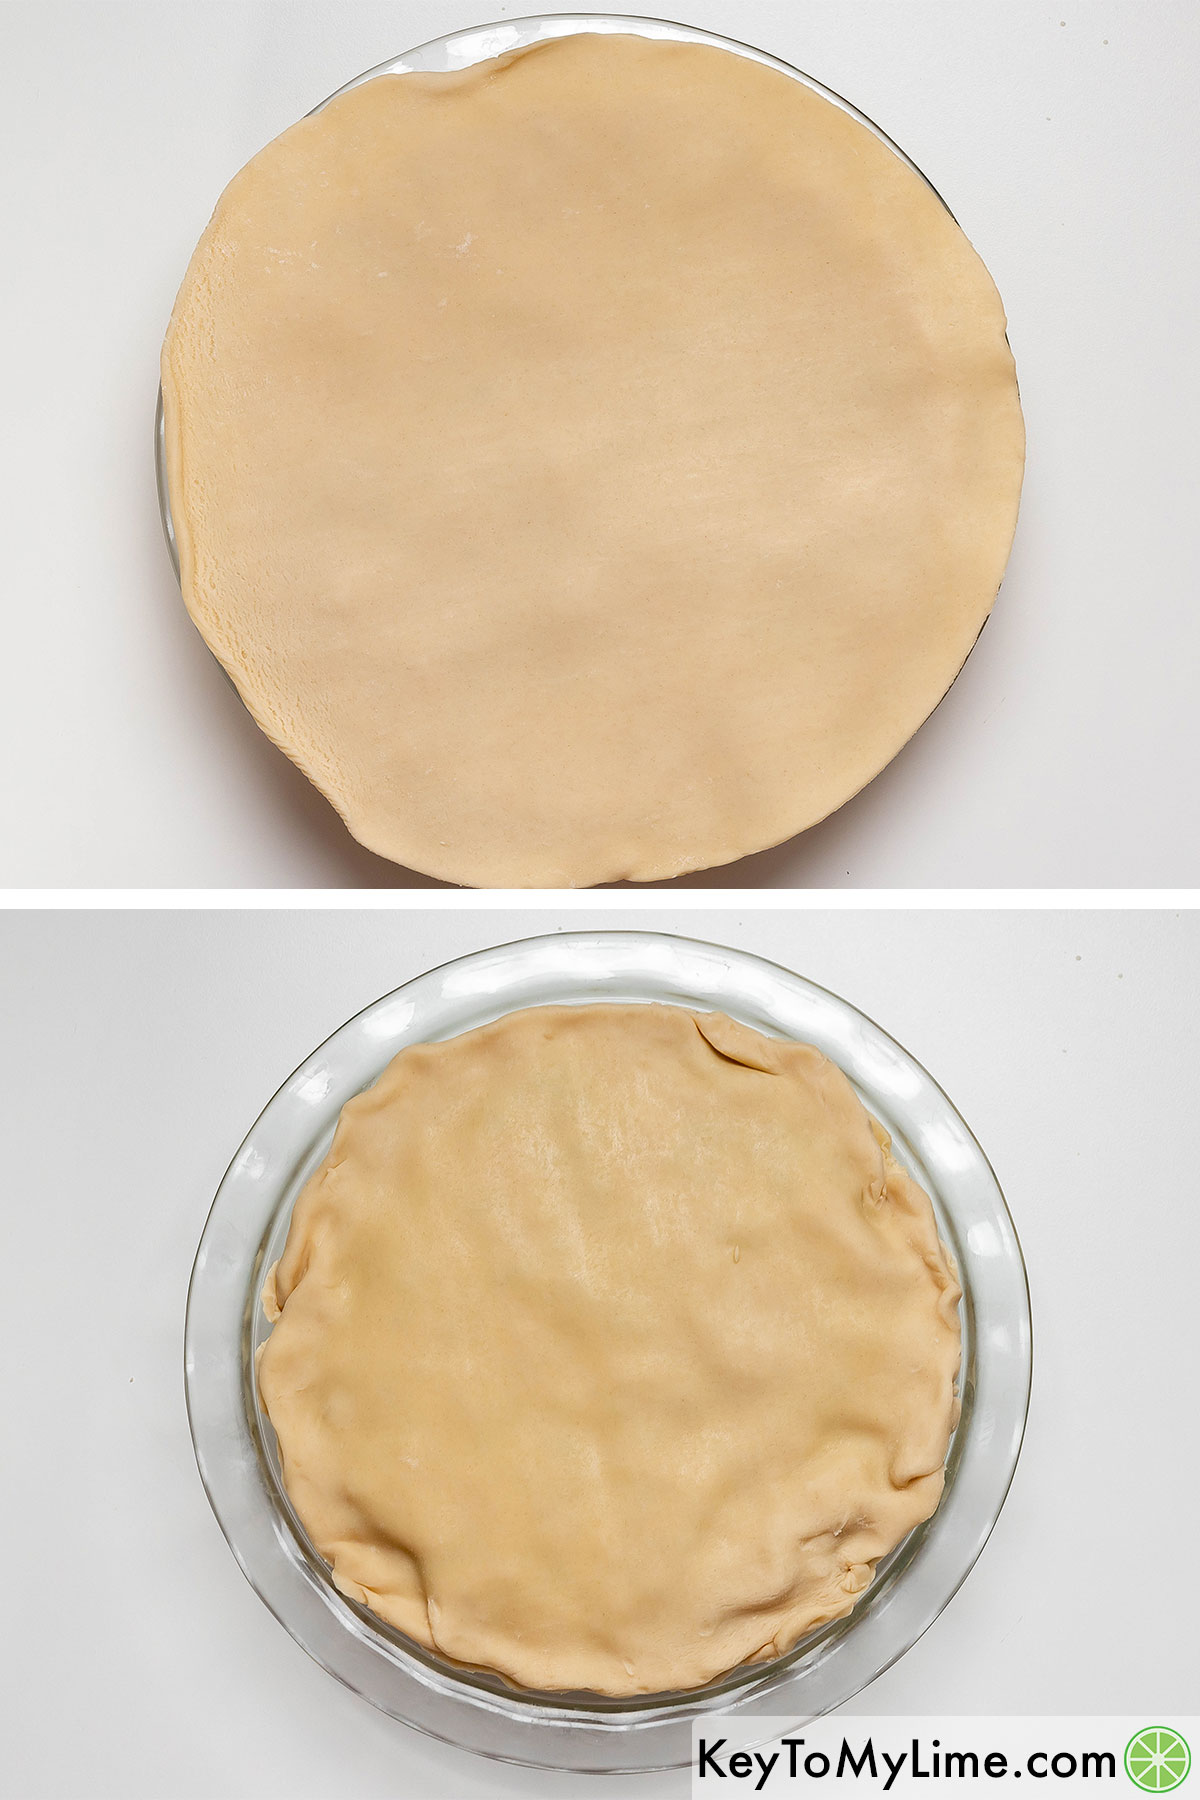 Placing the top pie crust on top and pinching and folding the two crusts together.